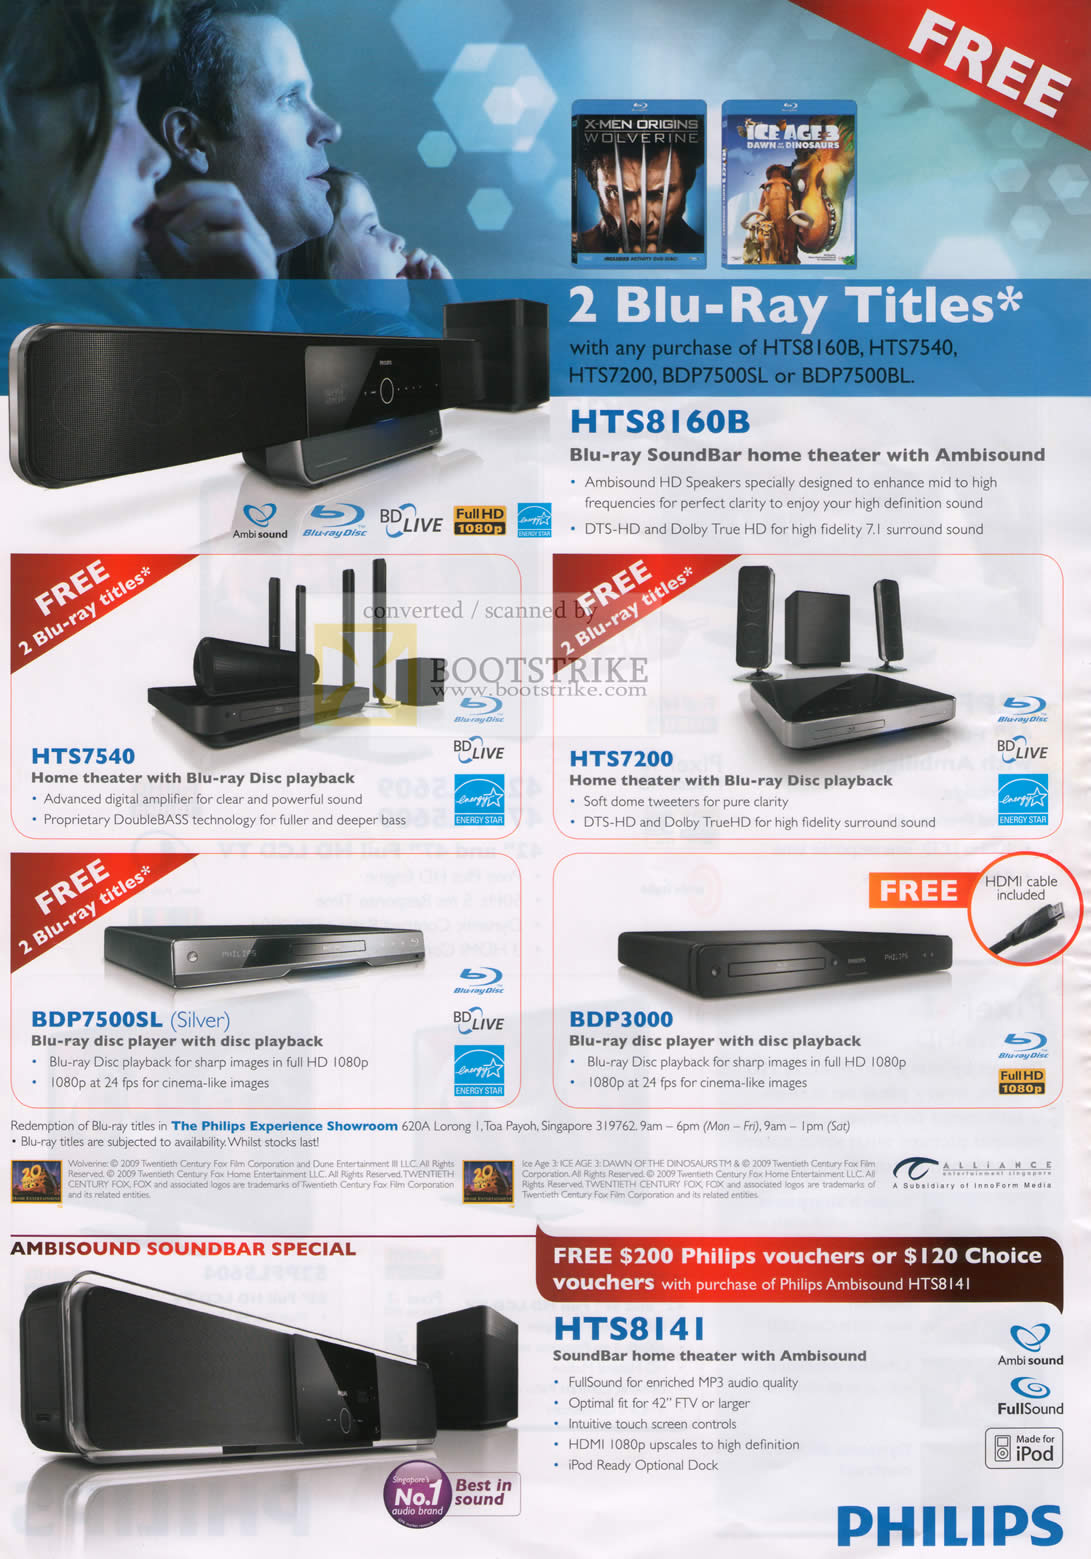 Sitex 2009 price list image brochure of Philips Home Theater HTS8160B HTS7540 HTS7200 BDP7500SL BDP3000 Blu Ray Player